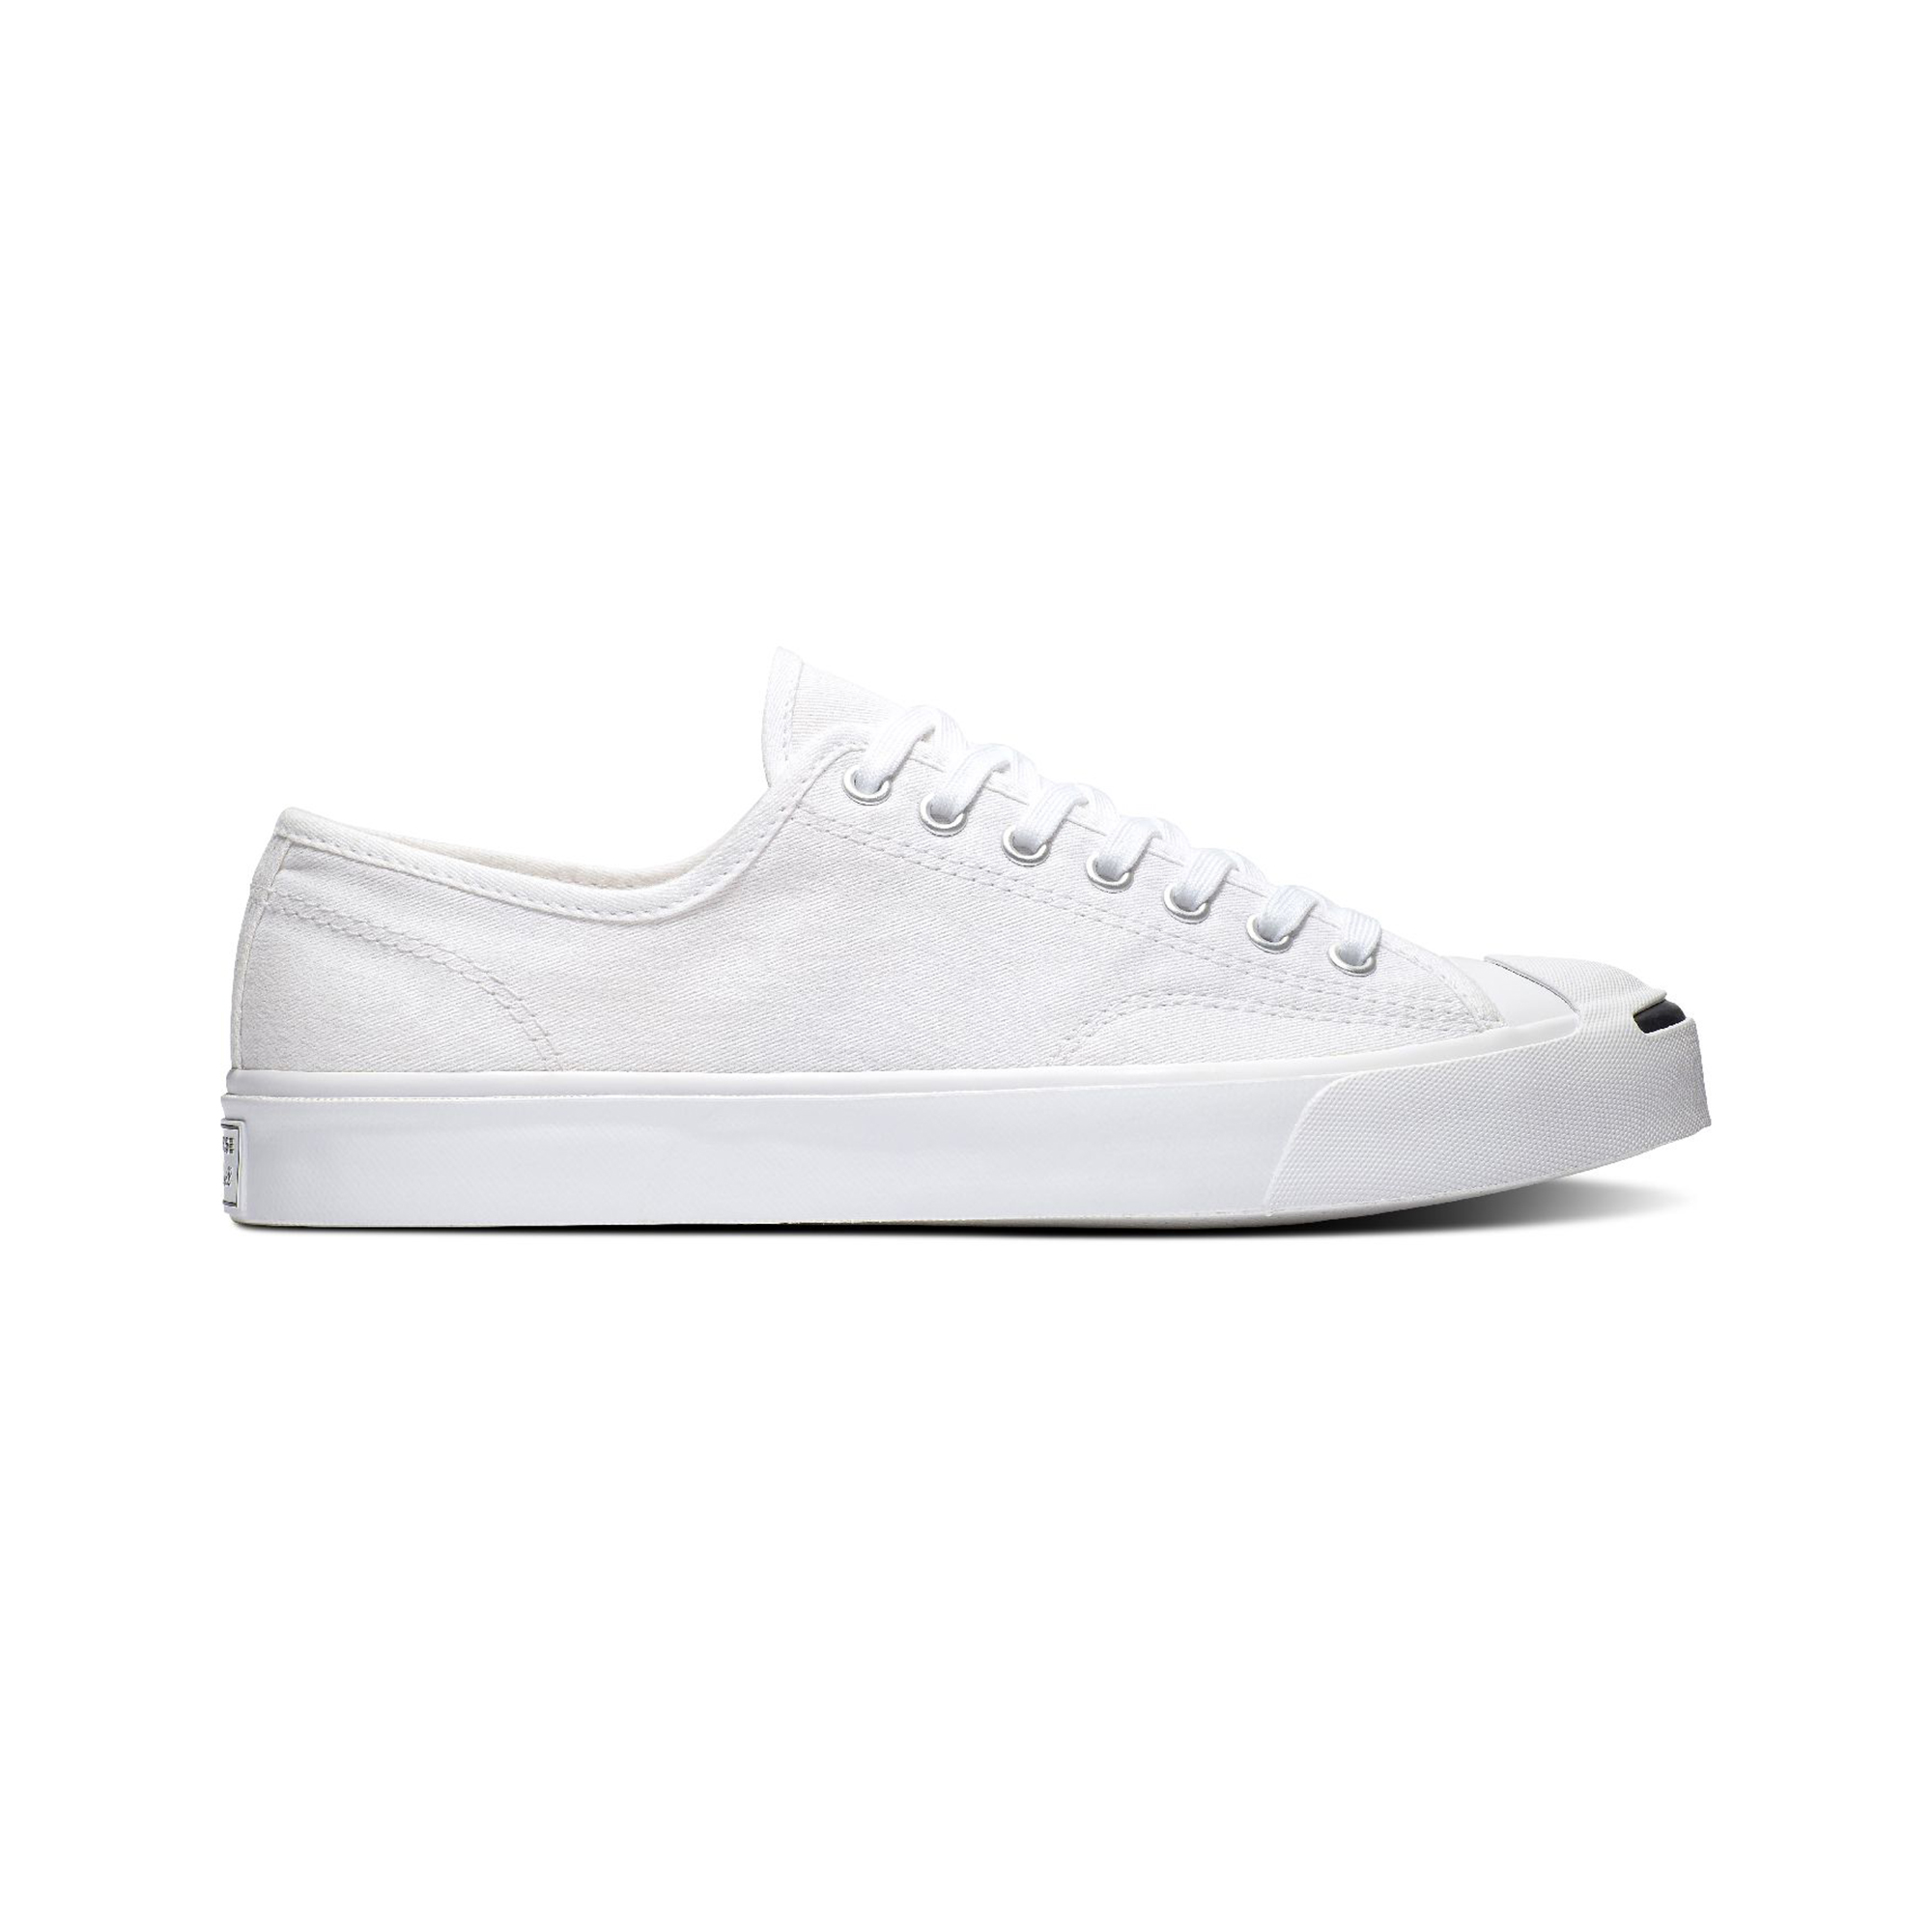 converse jack purcell ox white